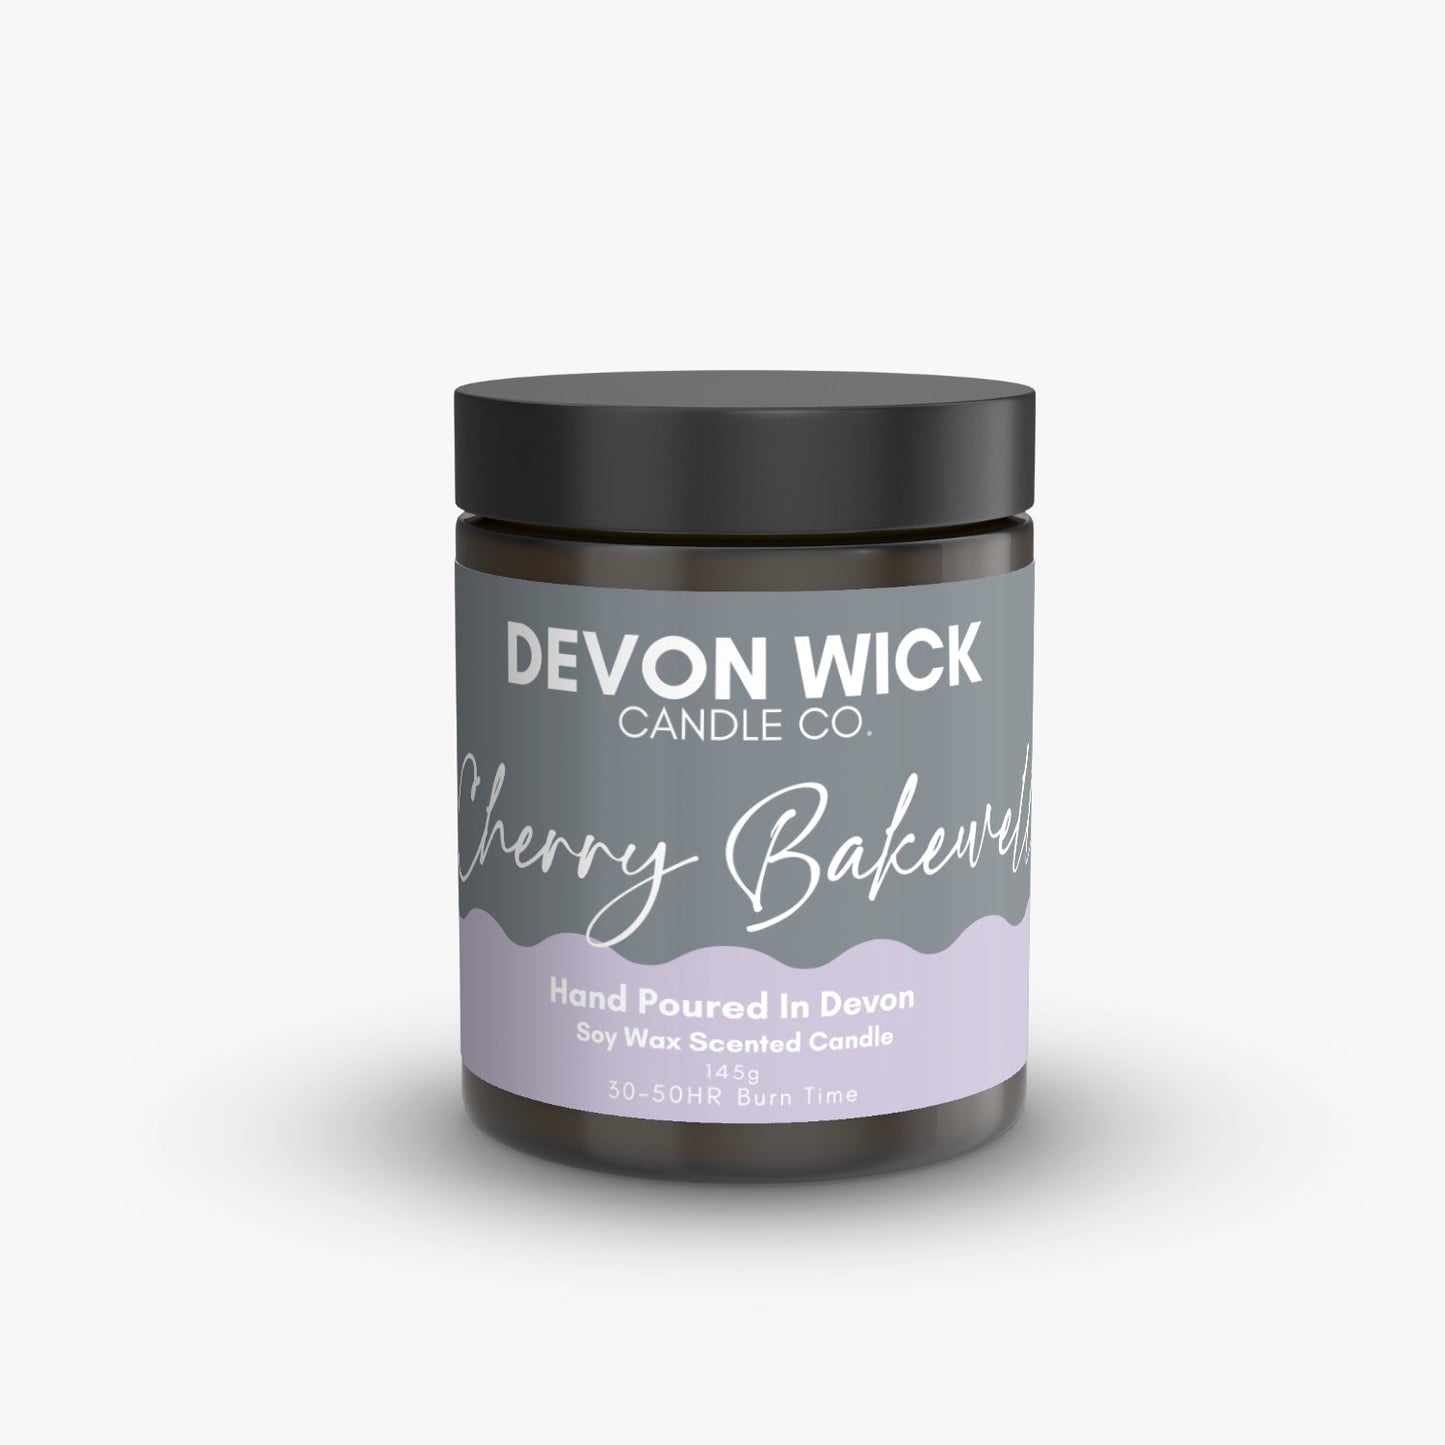 Devon Wick Candle Co. Limited Cherry Bakewell Soy Wax Candle